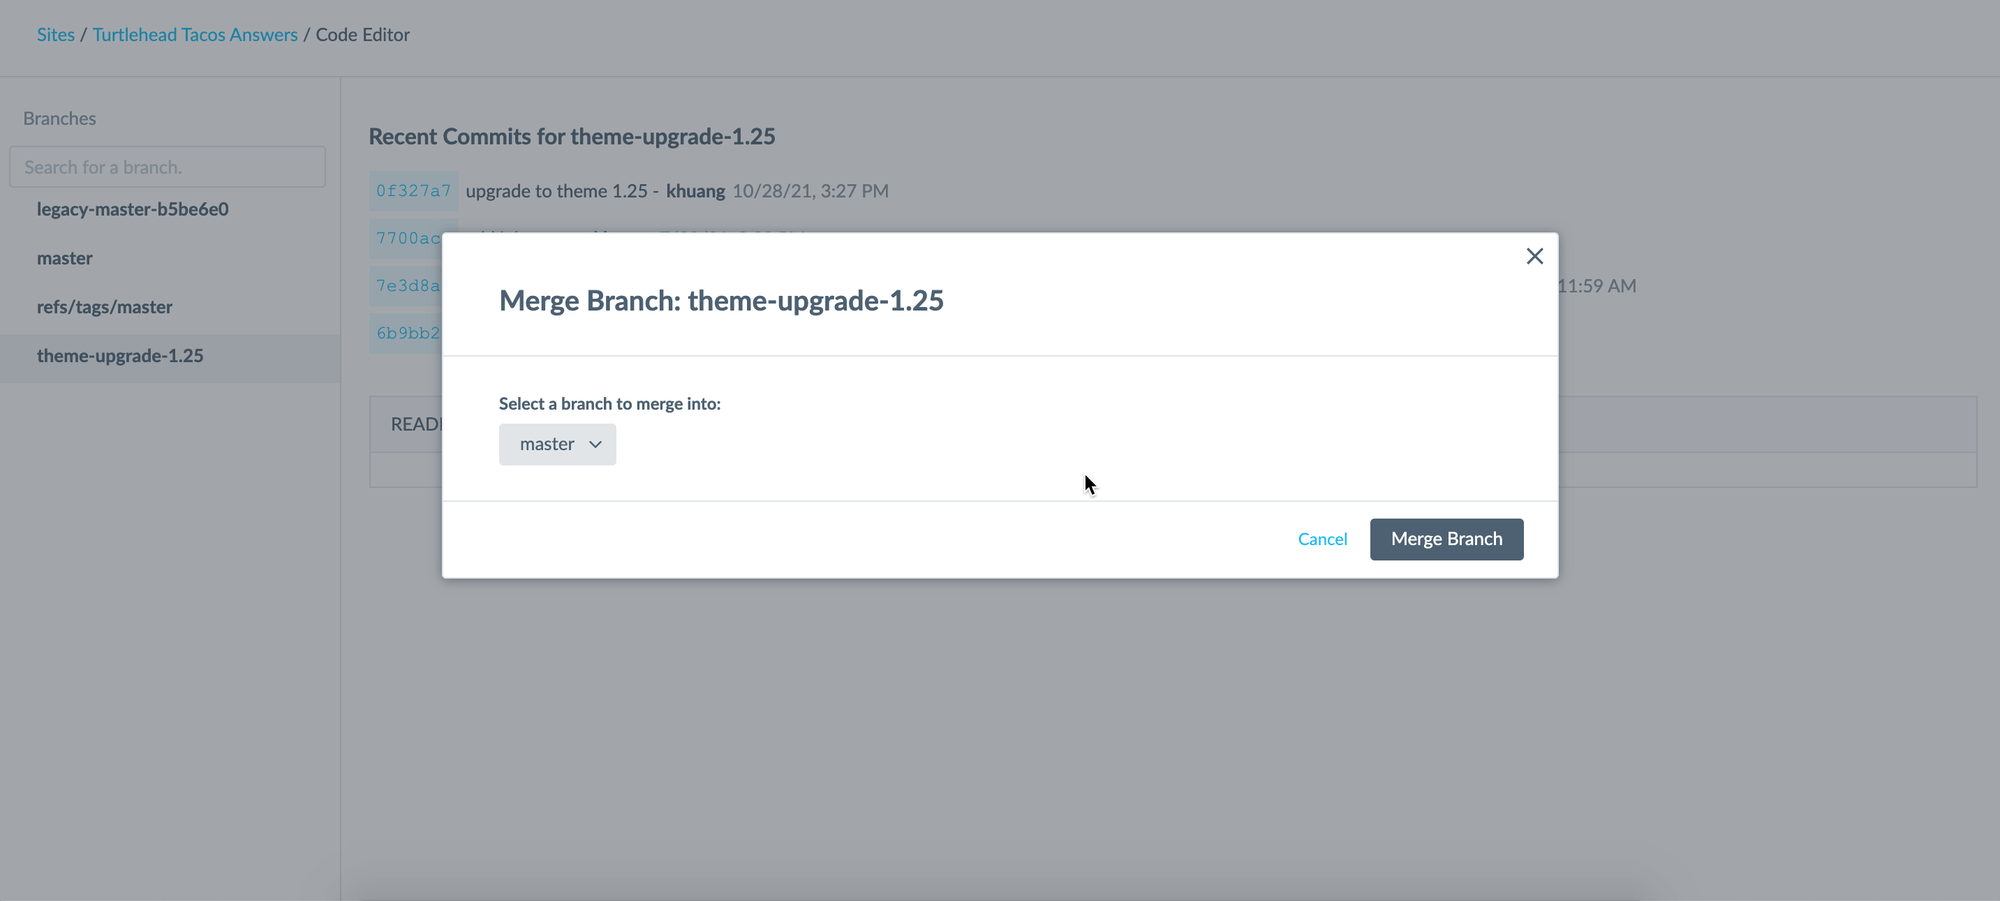 Merge Branch popup with master branch selected to merge into